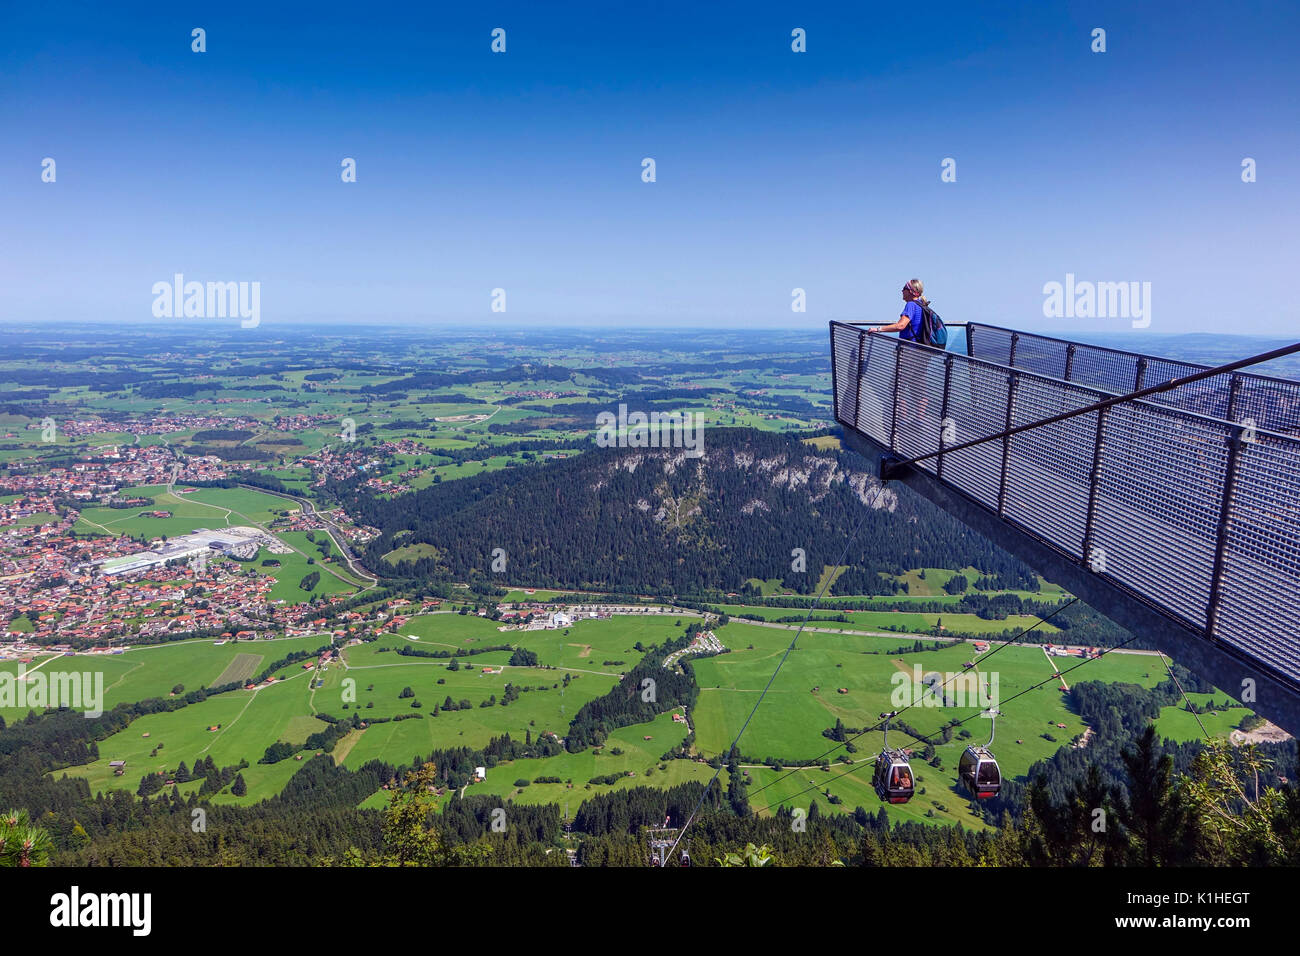 Solitary female figure on walkway viewpoint above Skigebiet Breitenberg-Hochalpe cable car, Pfronten, Bavaria, Germany Stock Photo